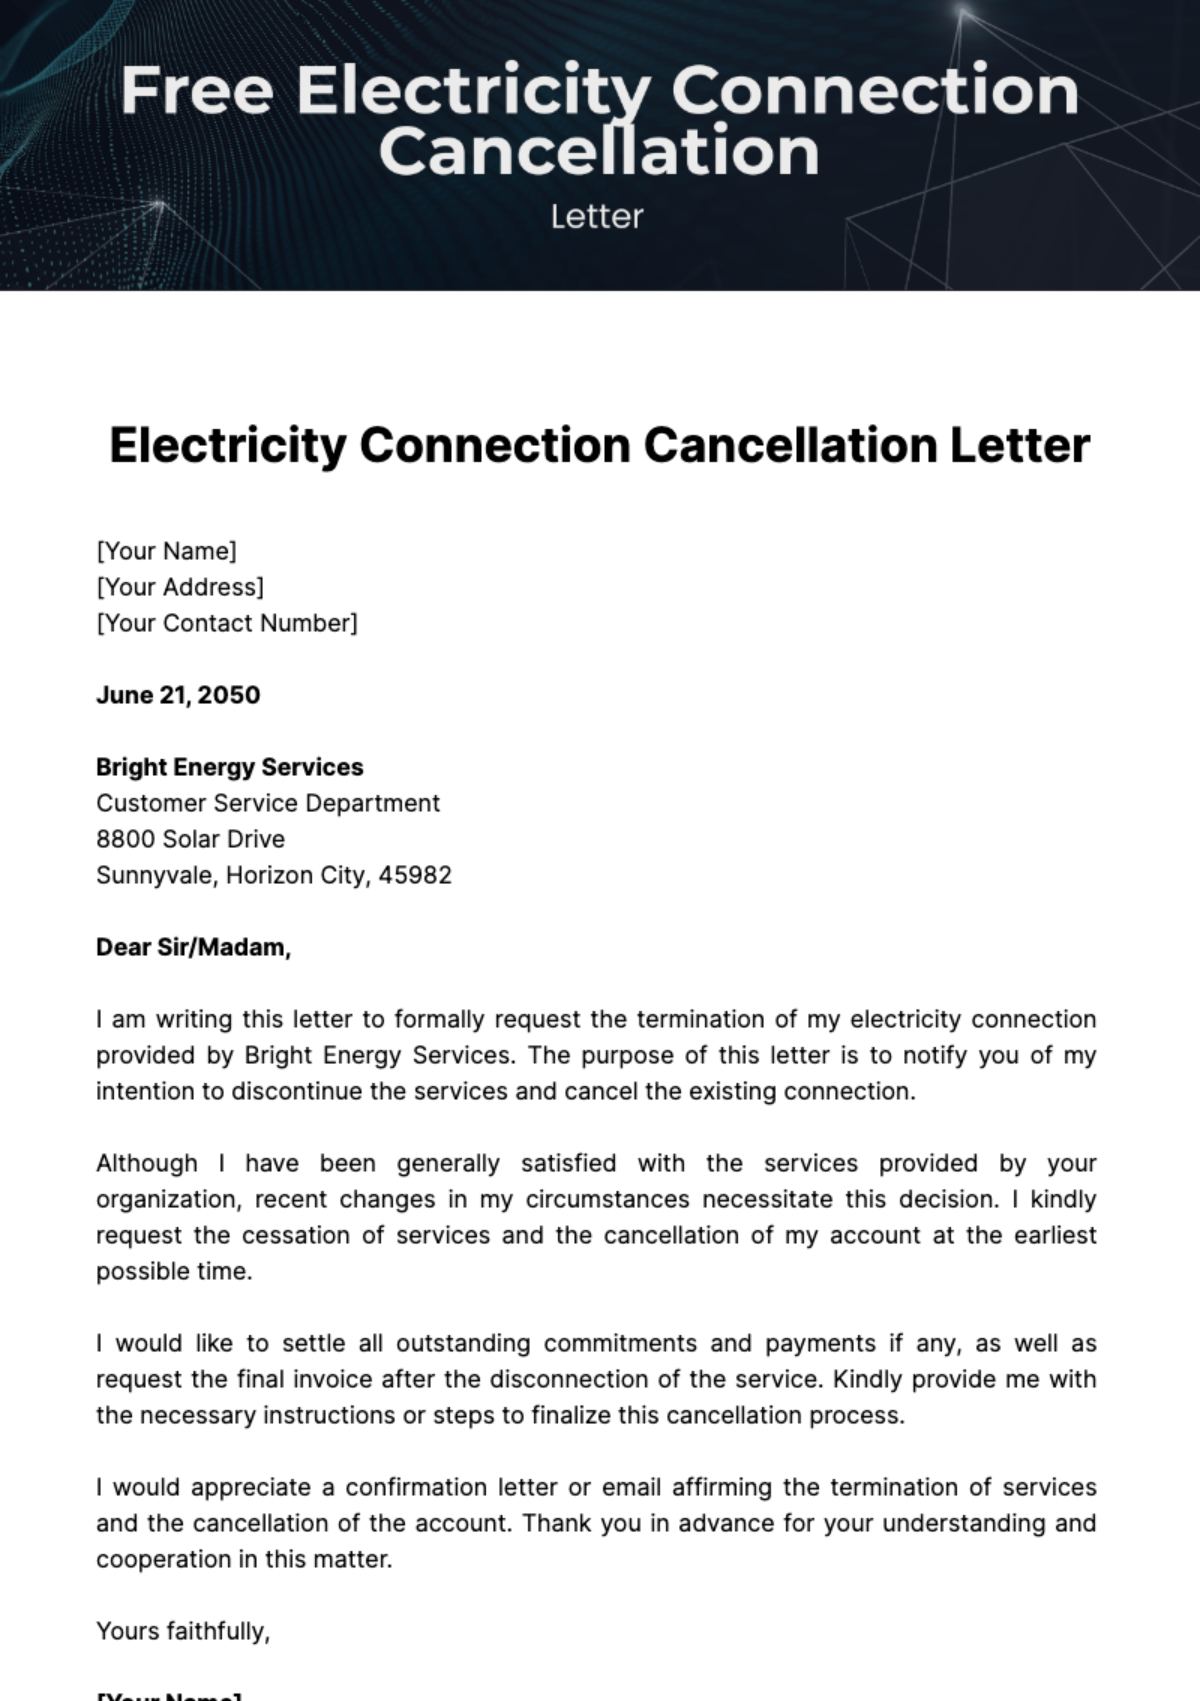 Free Electricity Connection Cancellation Letter Template